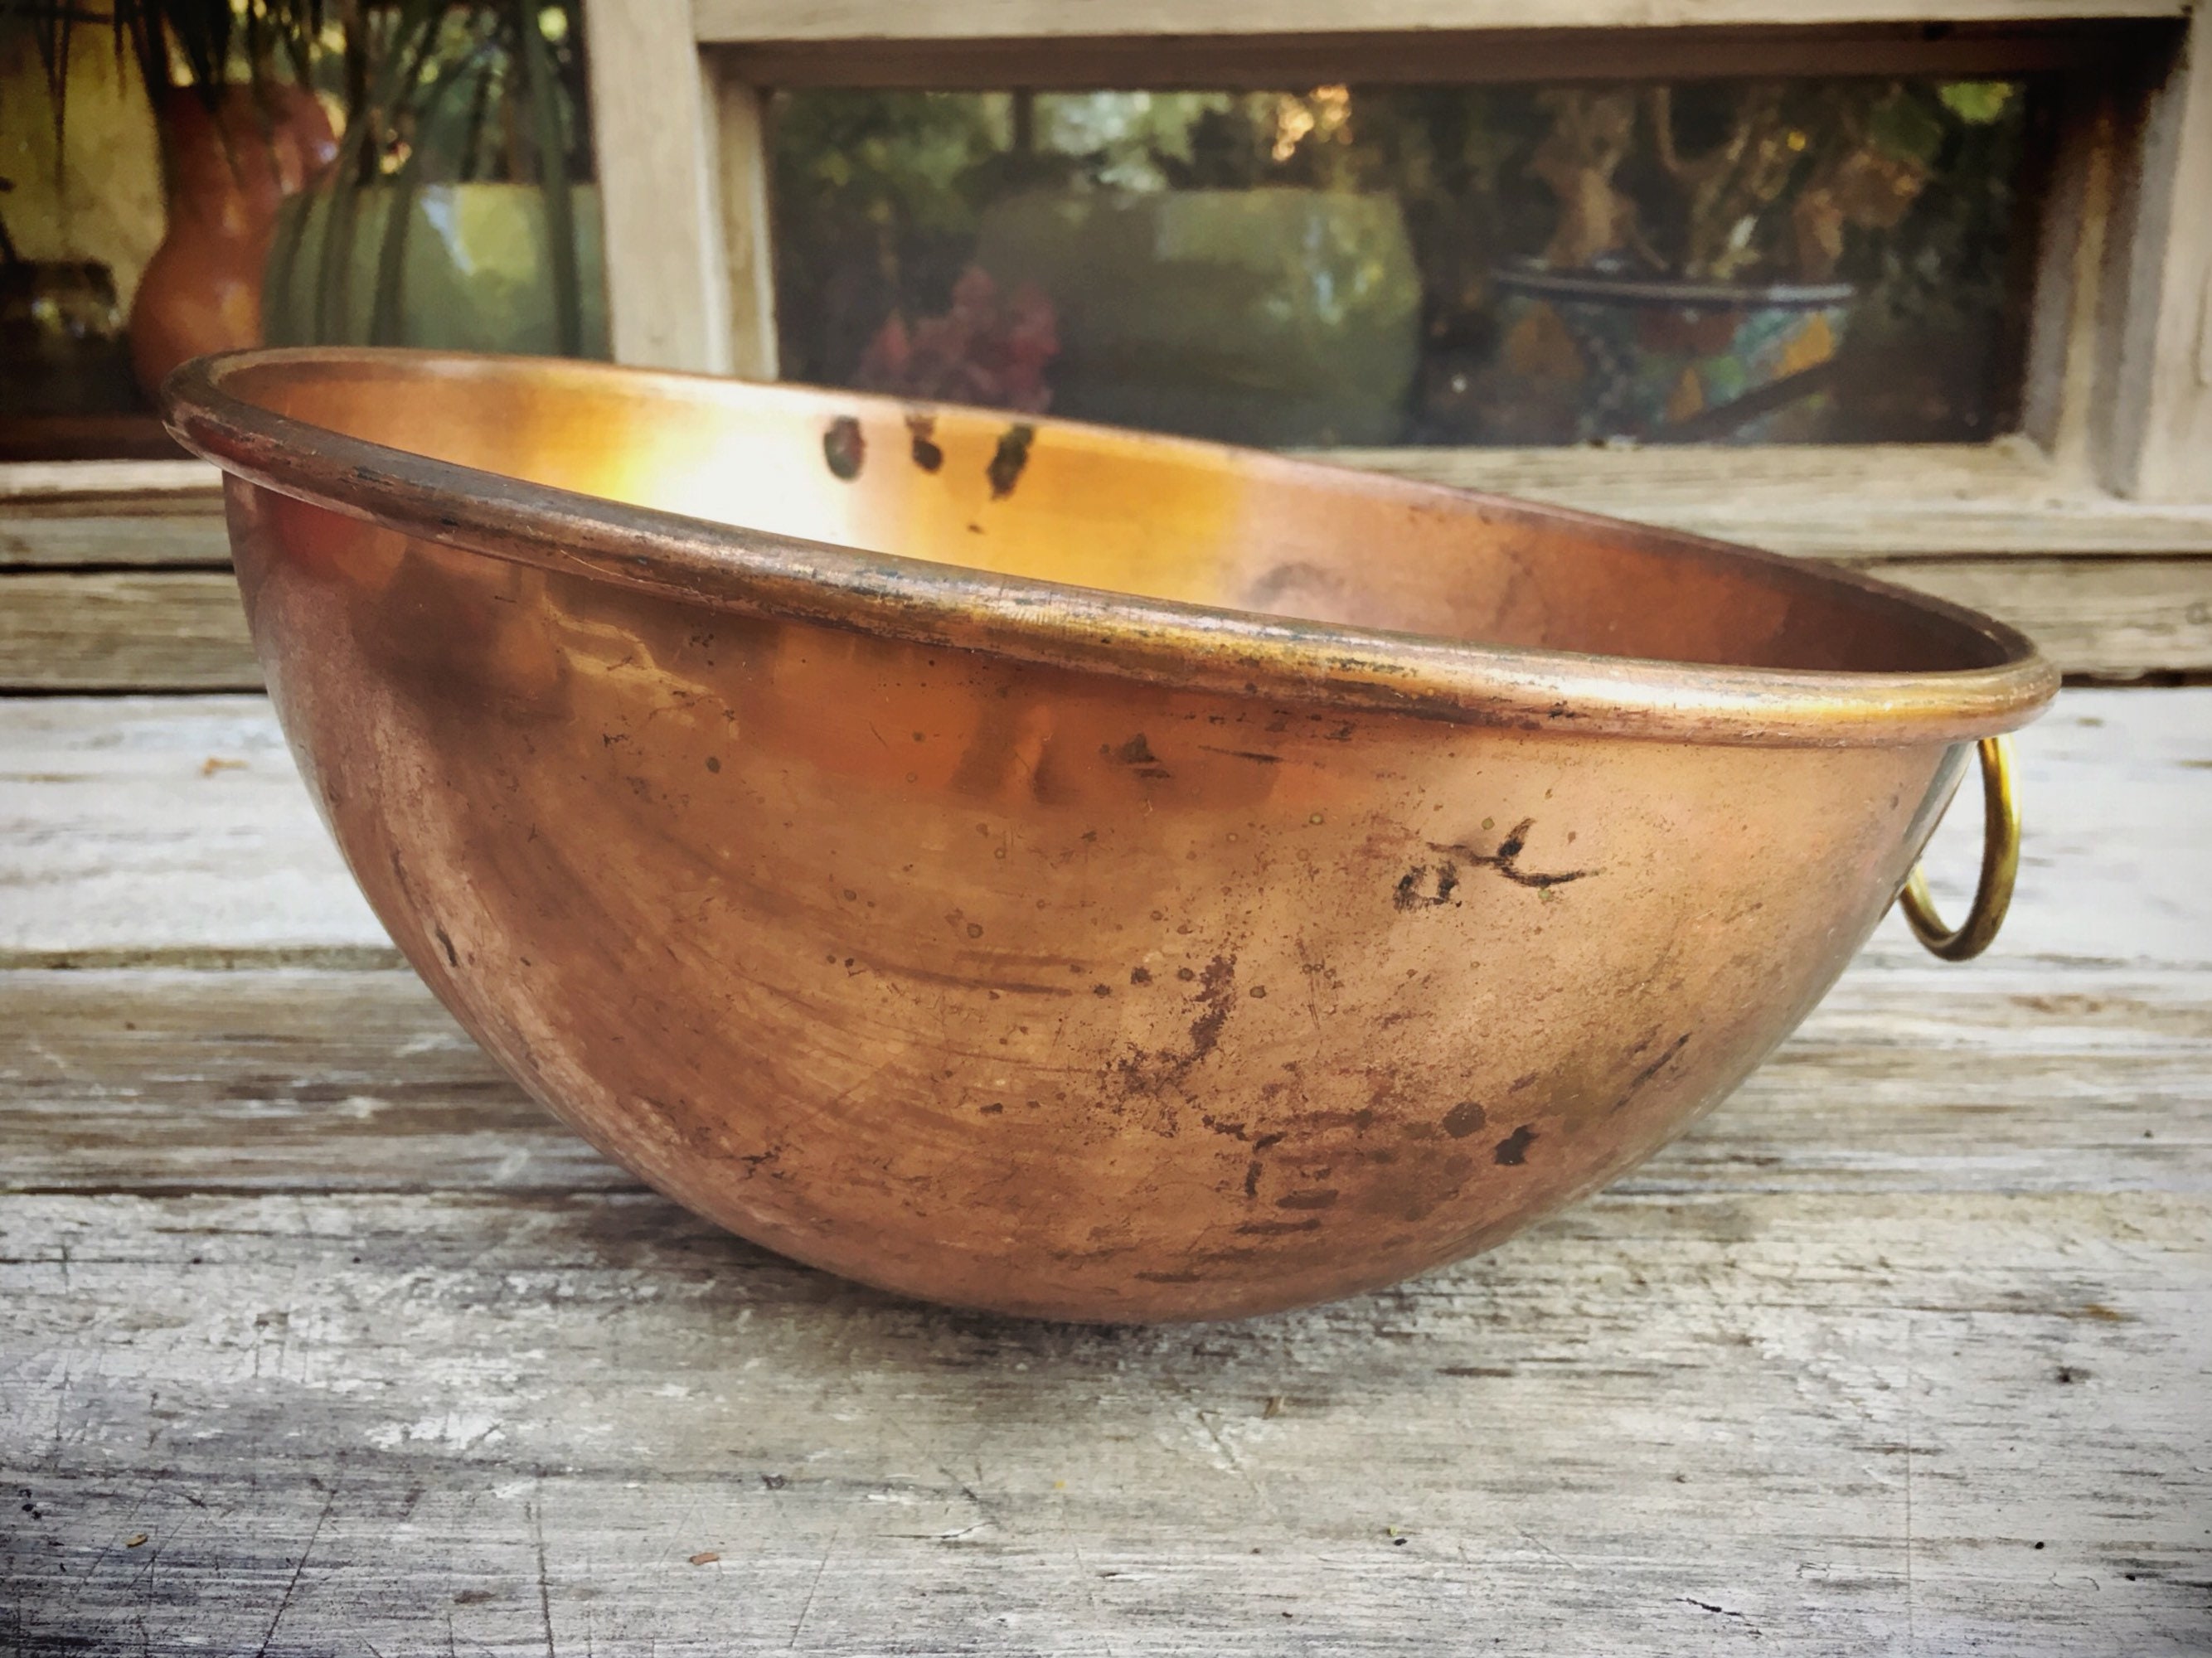 Group of 4 copper mixing bowls; 1126-091 - R.H. Lee & Co. Auctioneers